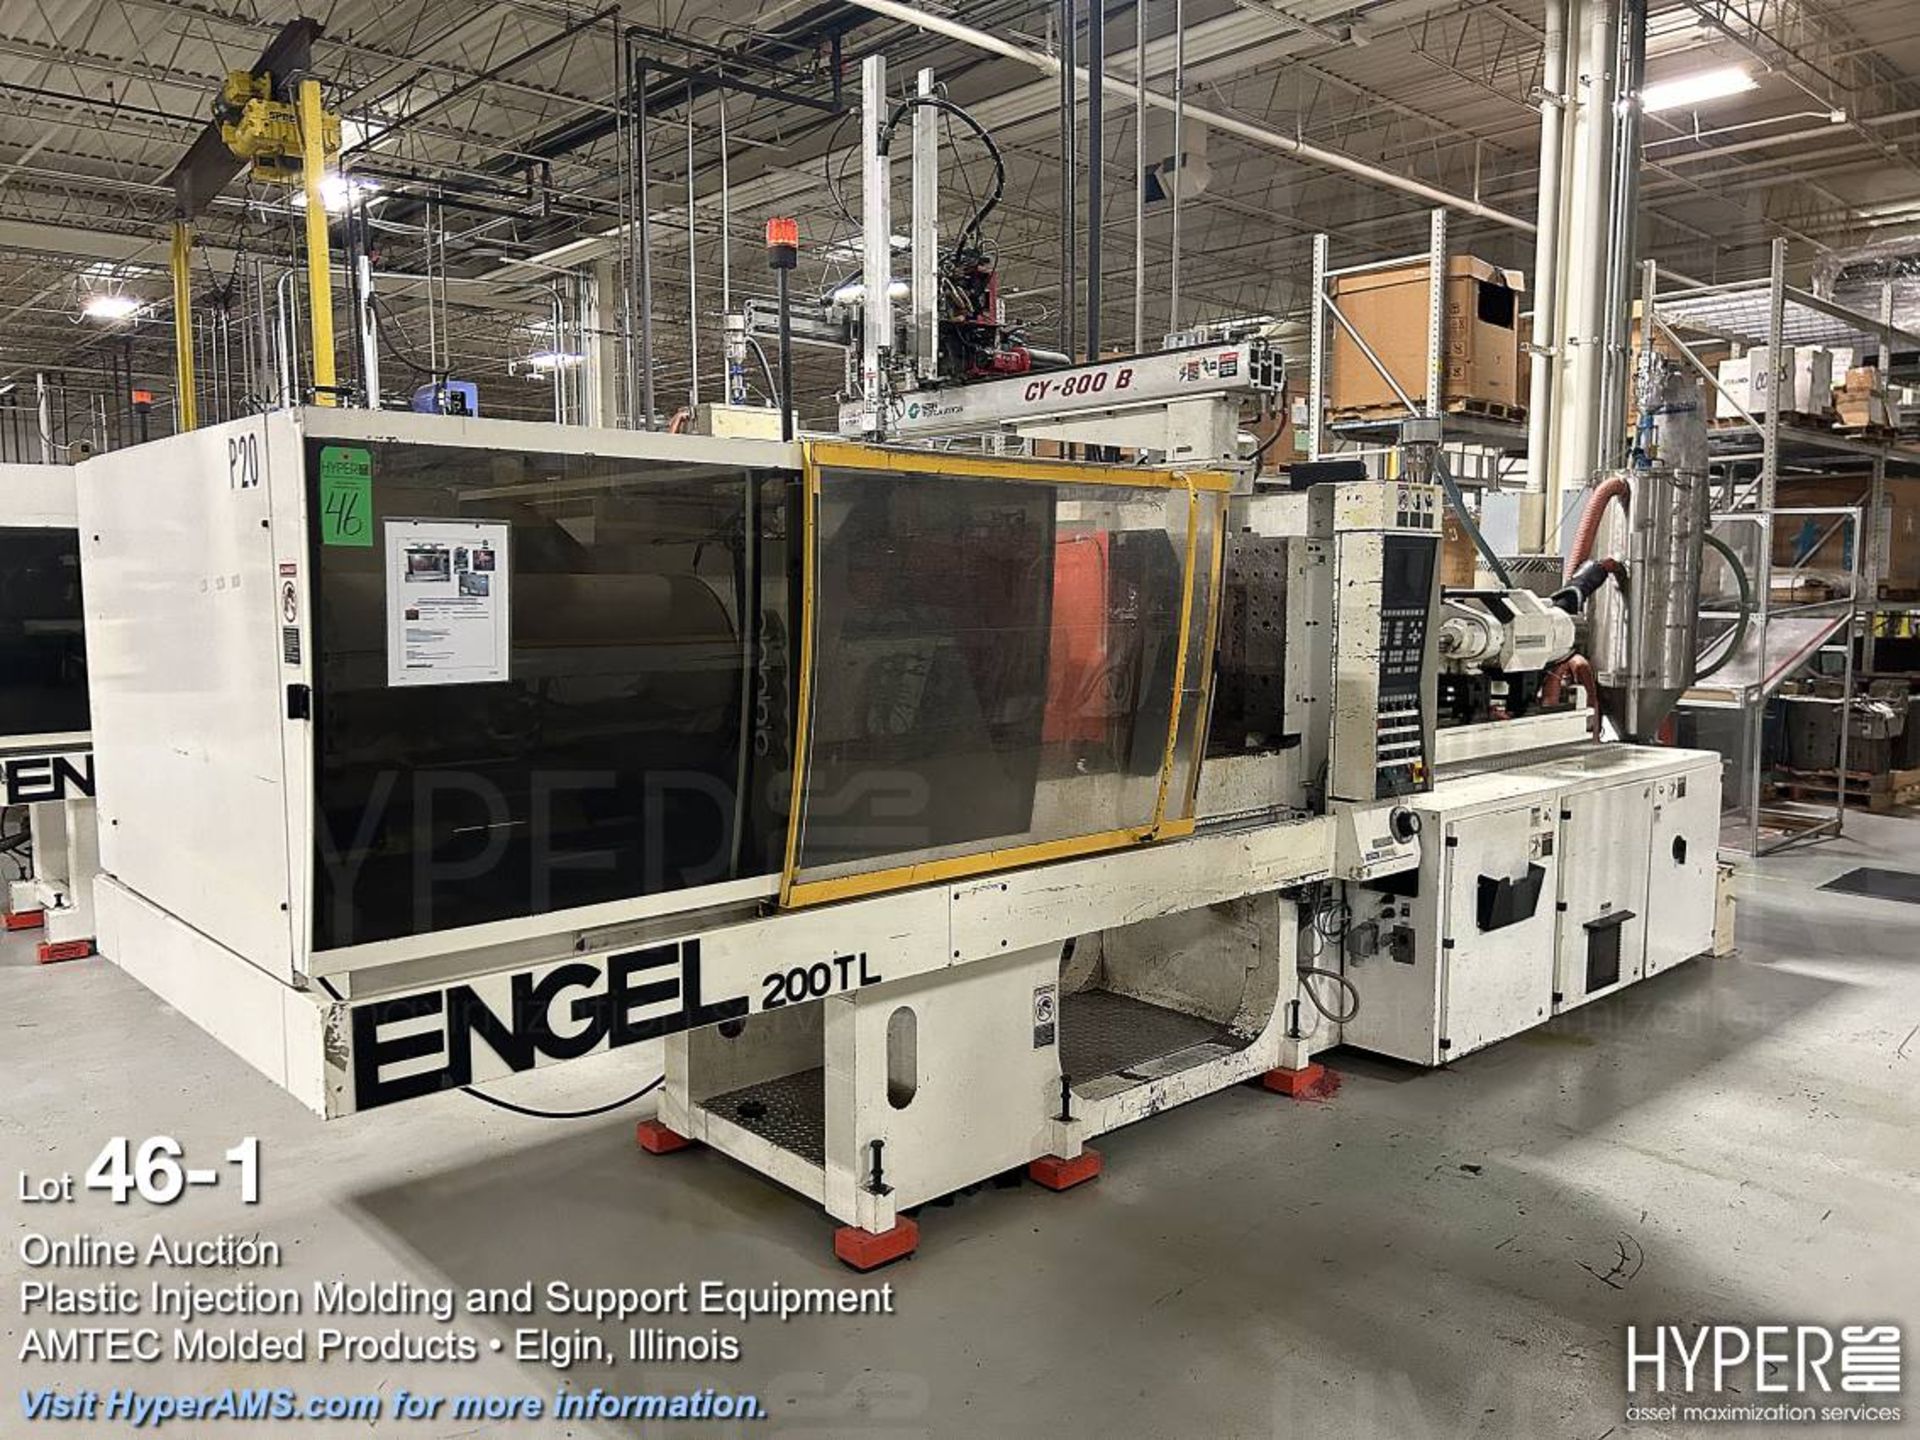 Engel ES1050/200TL toggle clamp plastic injection molding machine